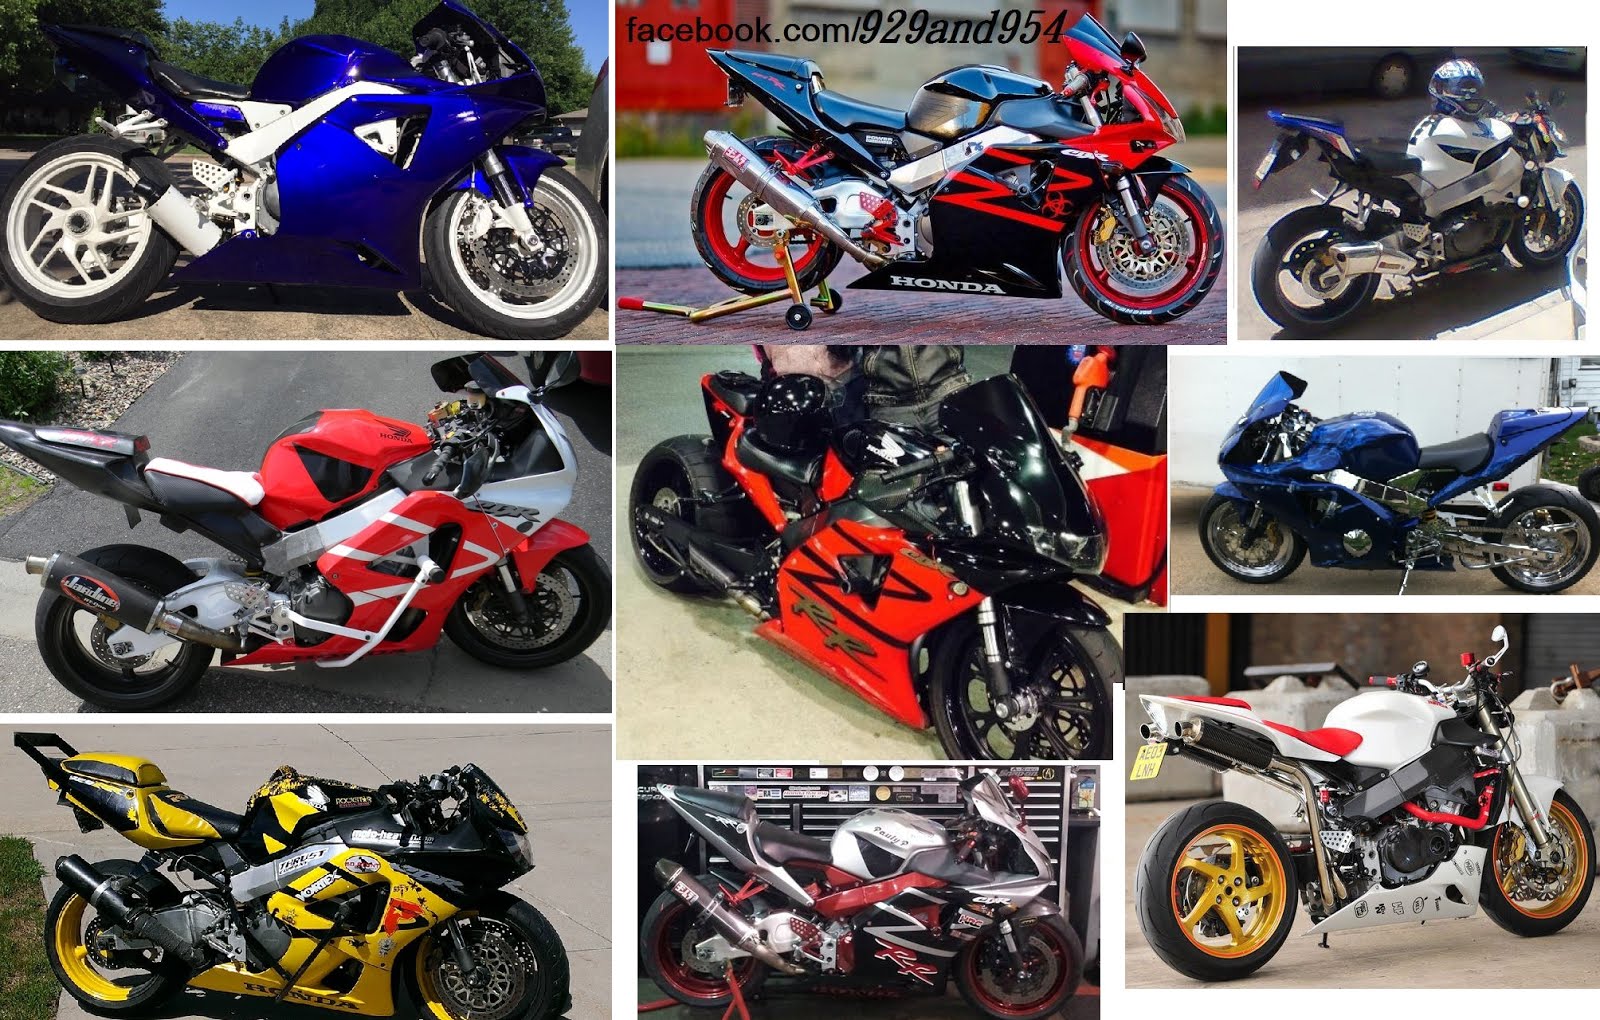 Featured CBR 929 and 954 Bikes